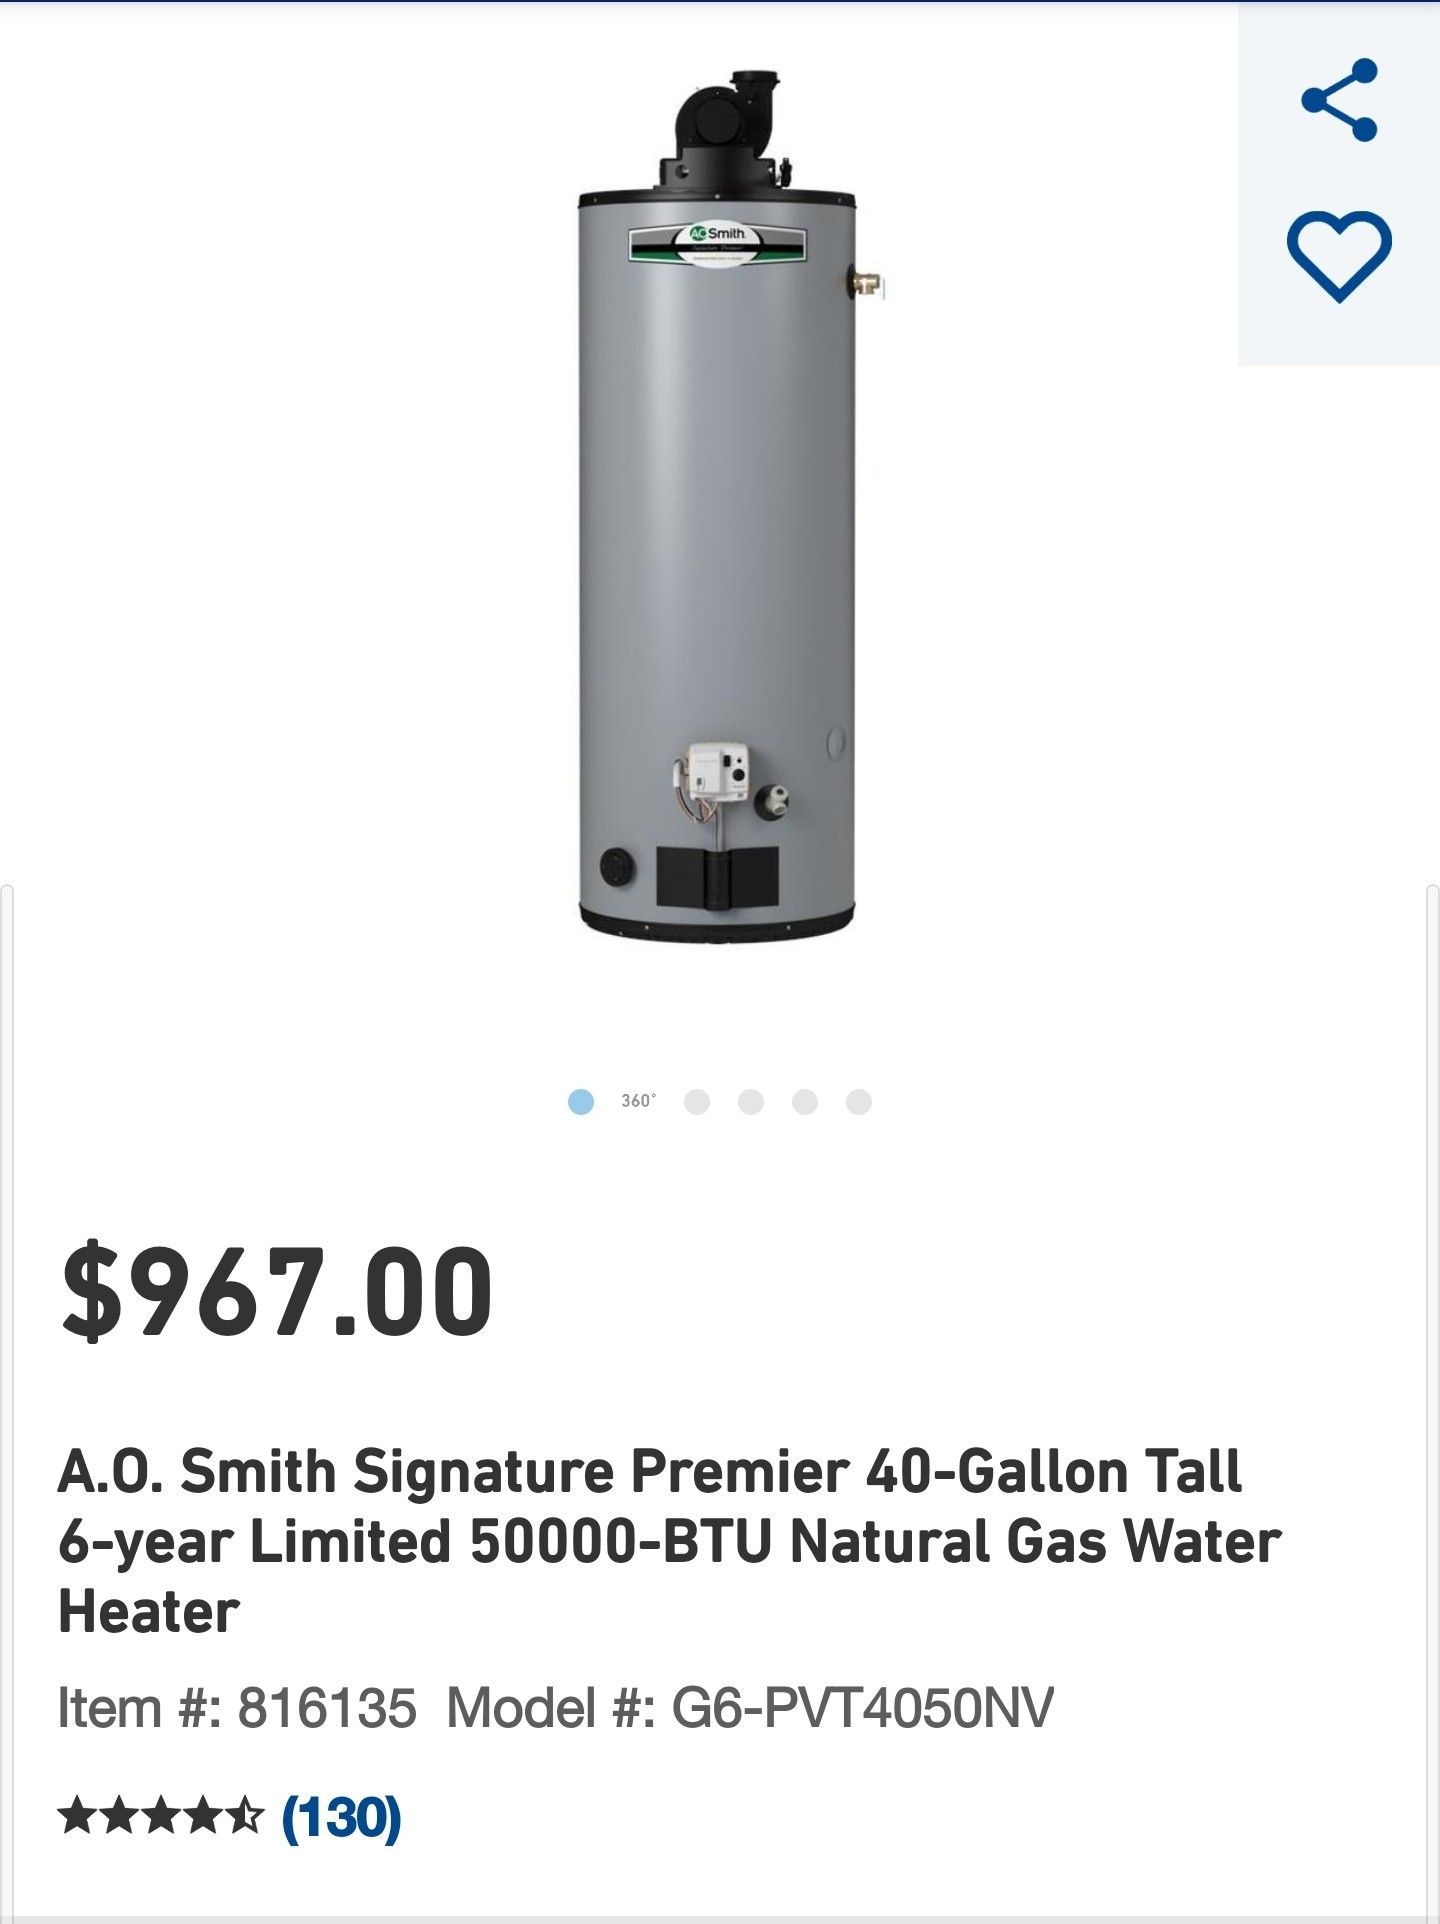 A.O. Smith Signature Premier 40-Gallon Tall 6-year Limited 50000-BTU Natural Gas Water Heater